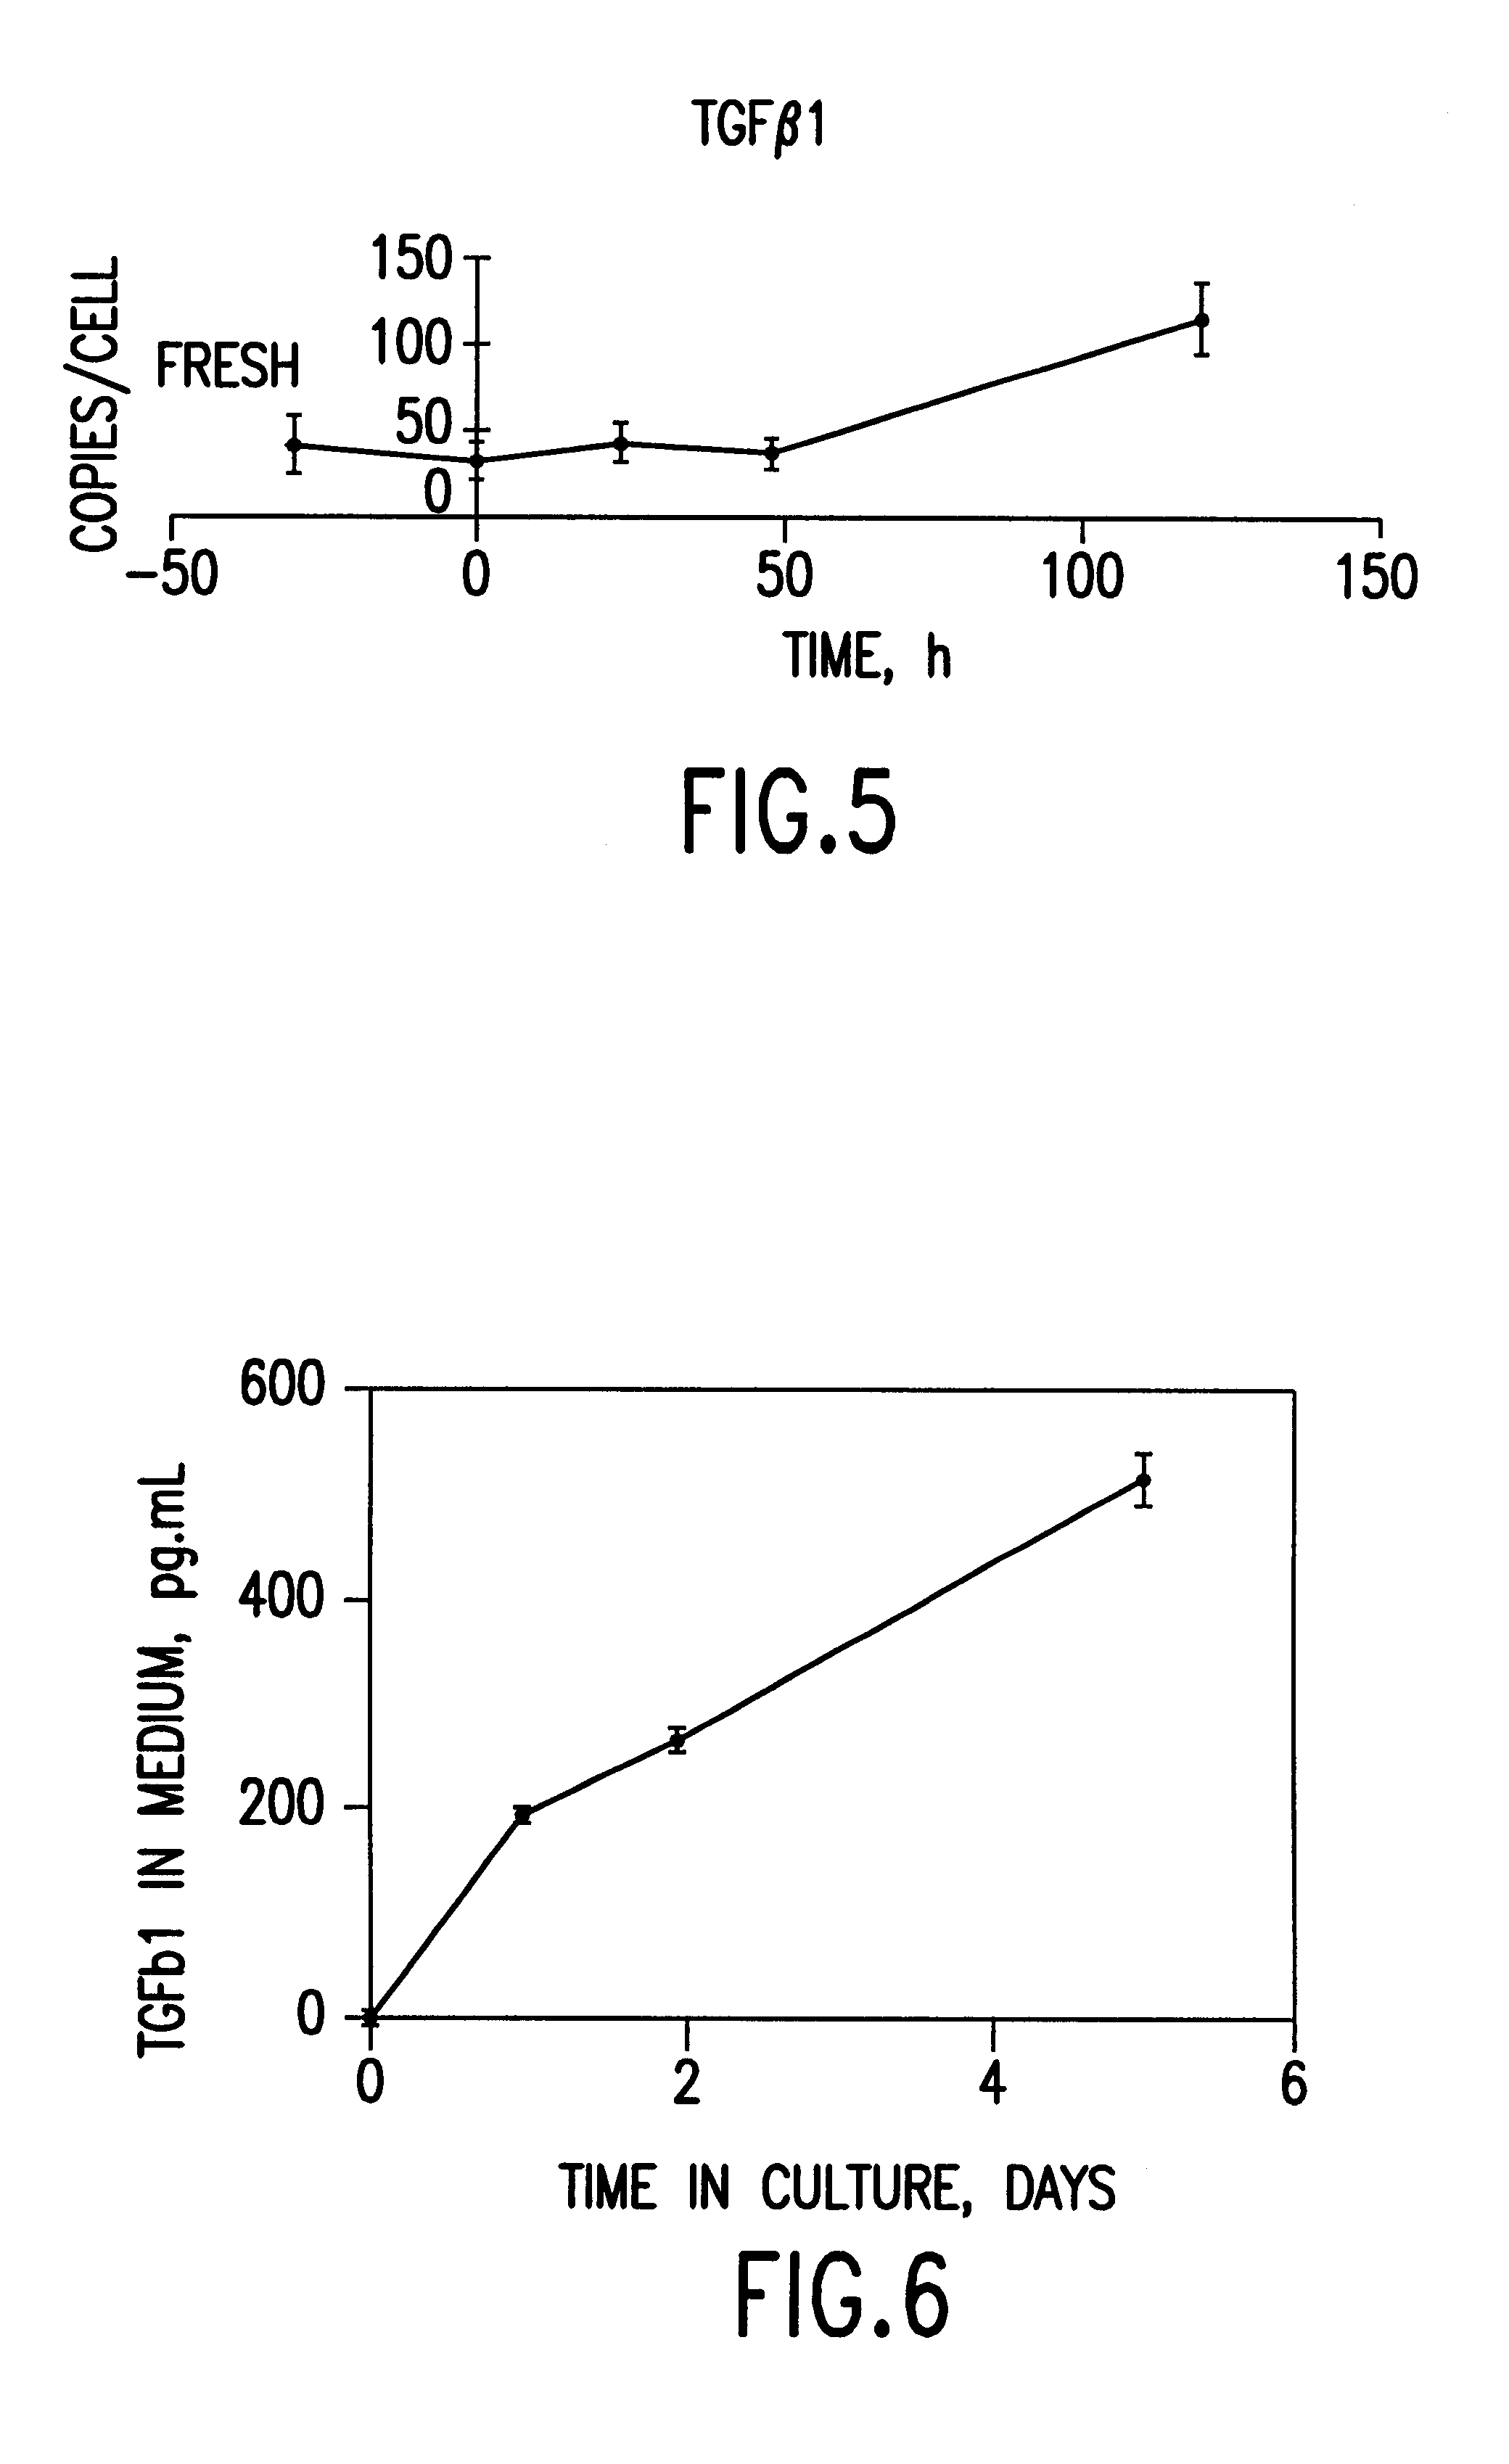 Cells or tissues with increased protein factors and methods of making and using same